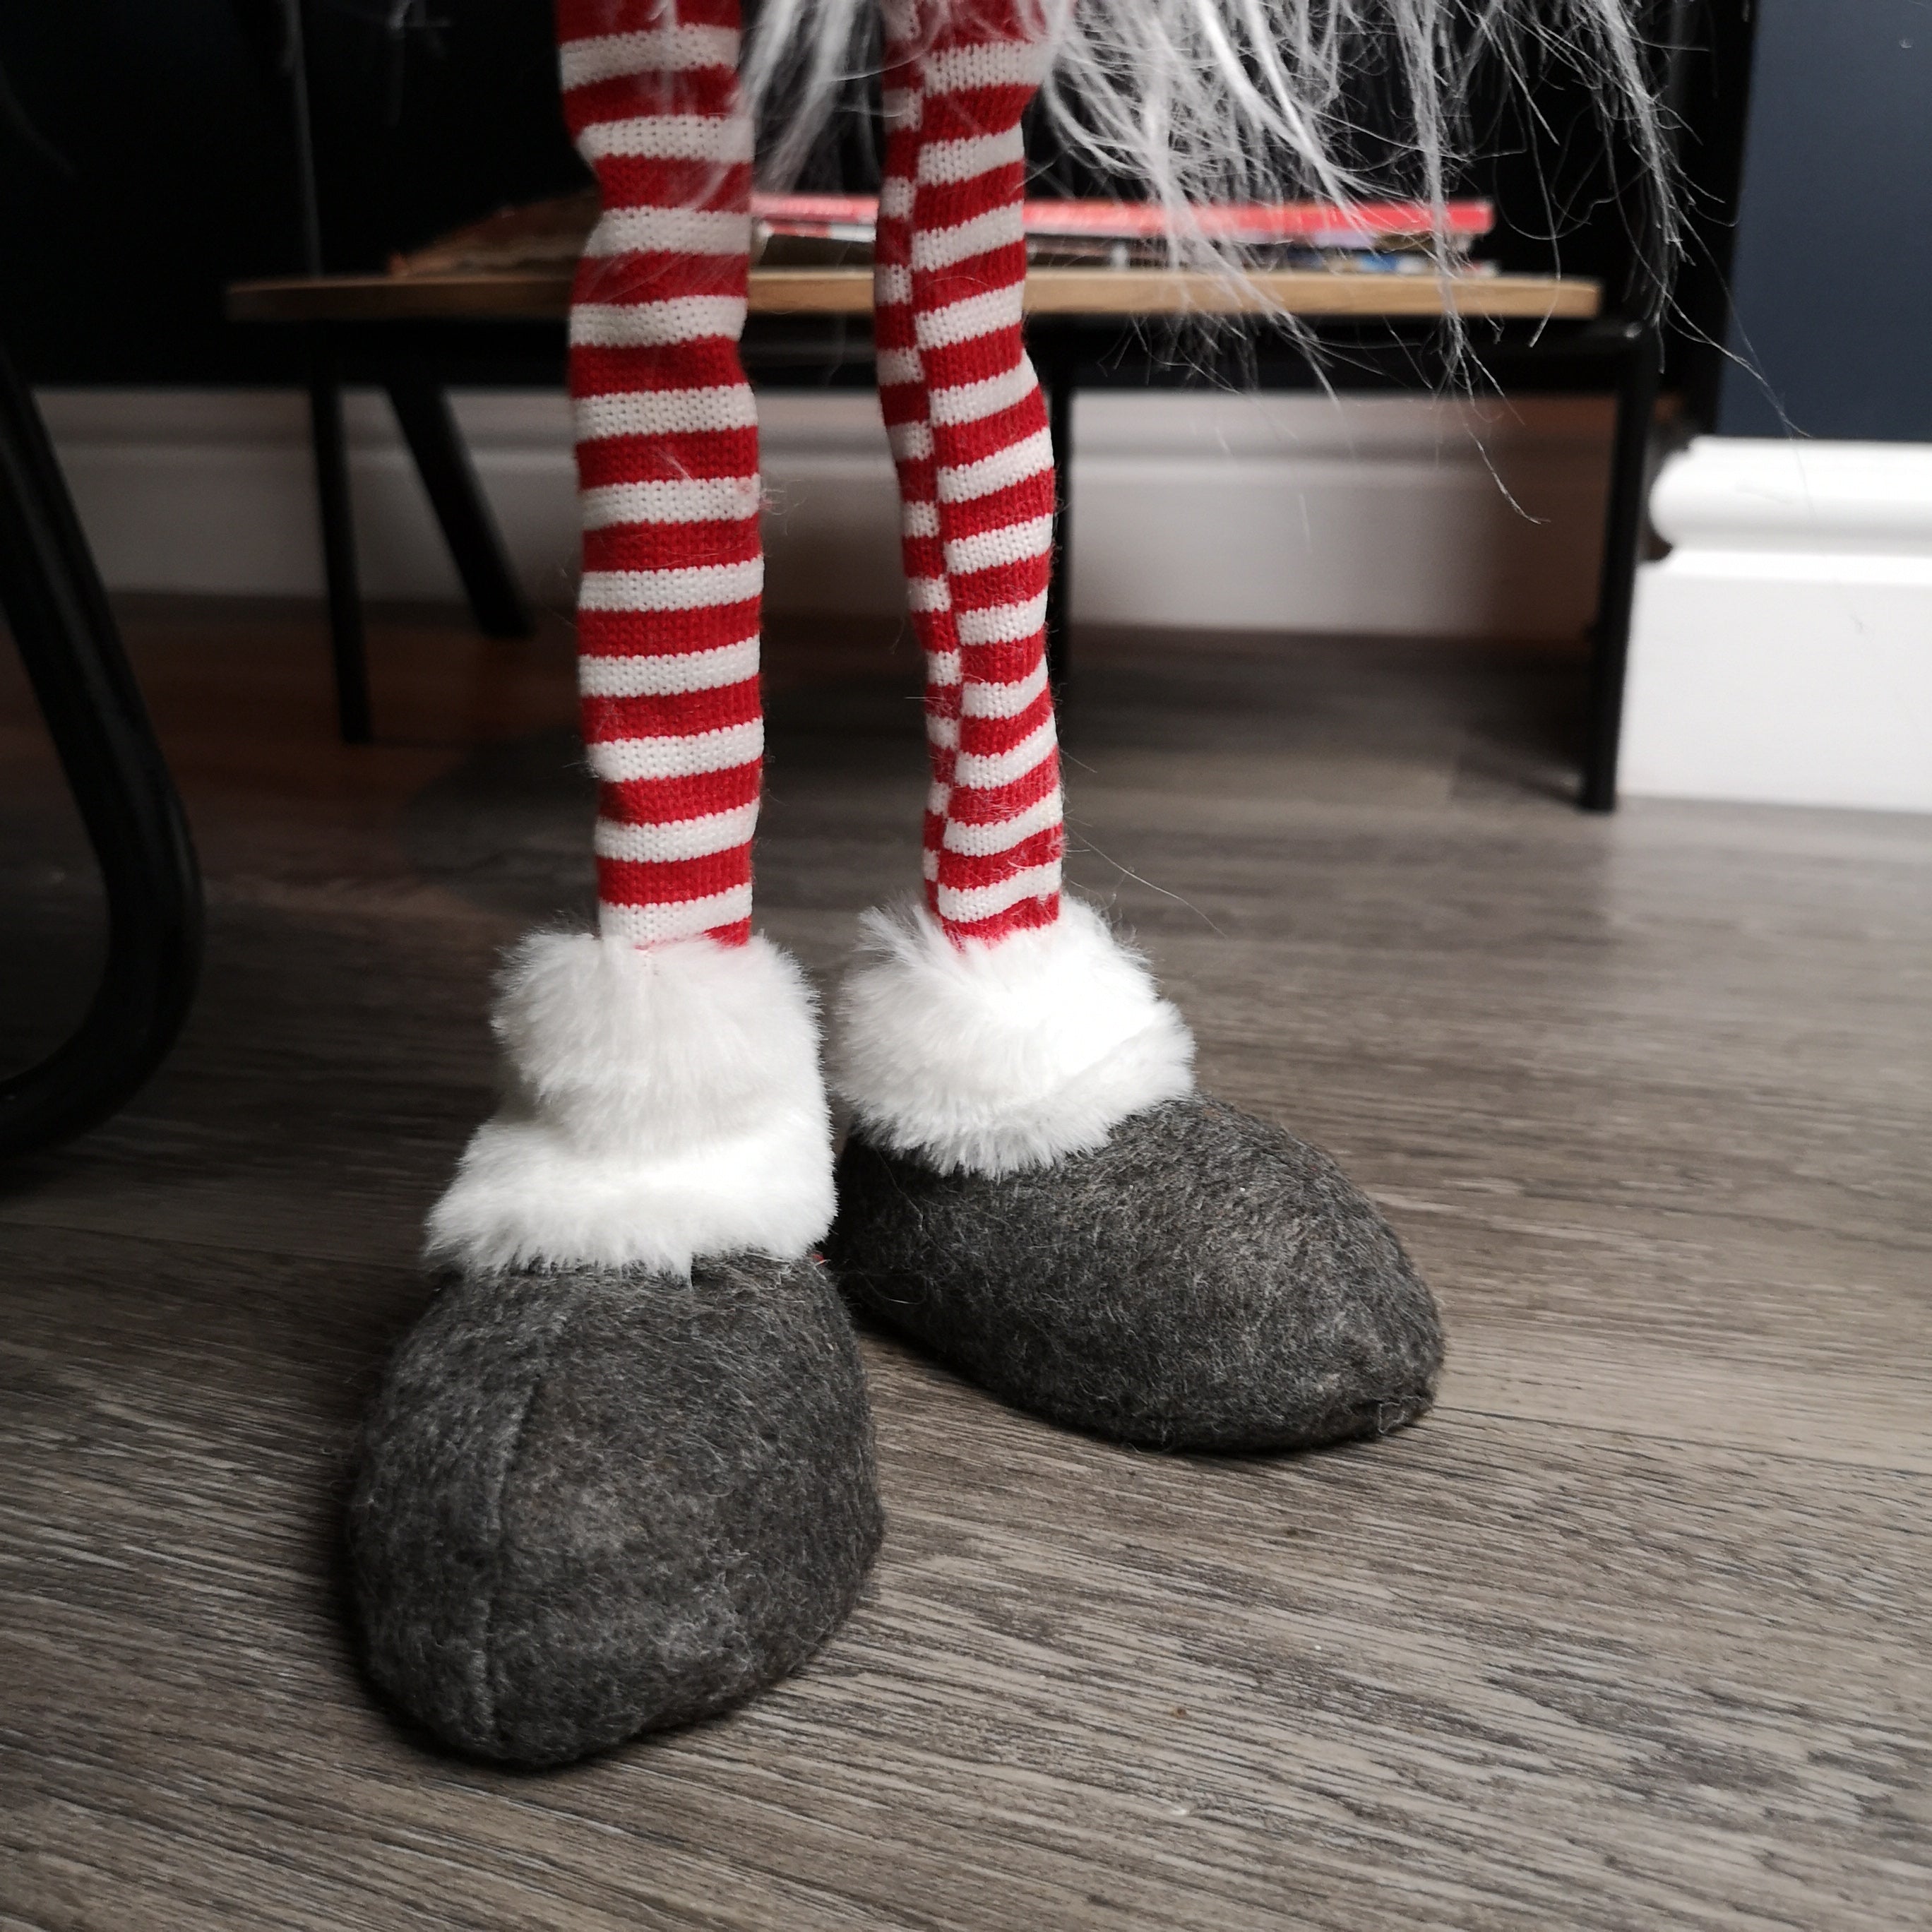 67cm Standing Plush Christmas Gonk with Grooved Hat in Red